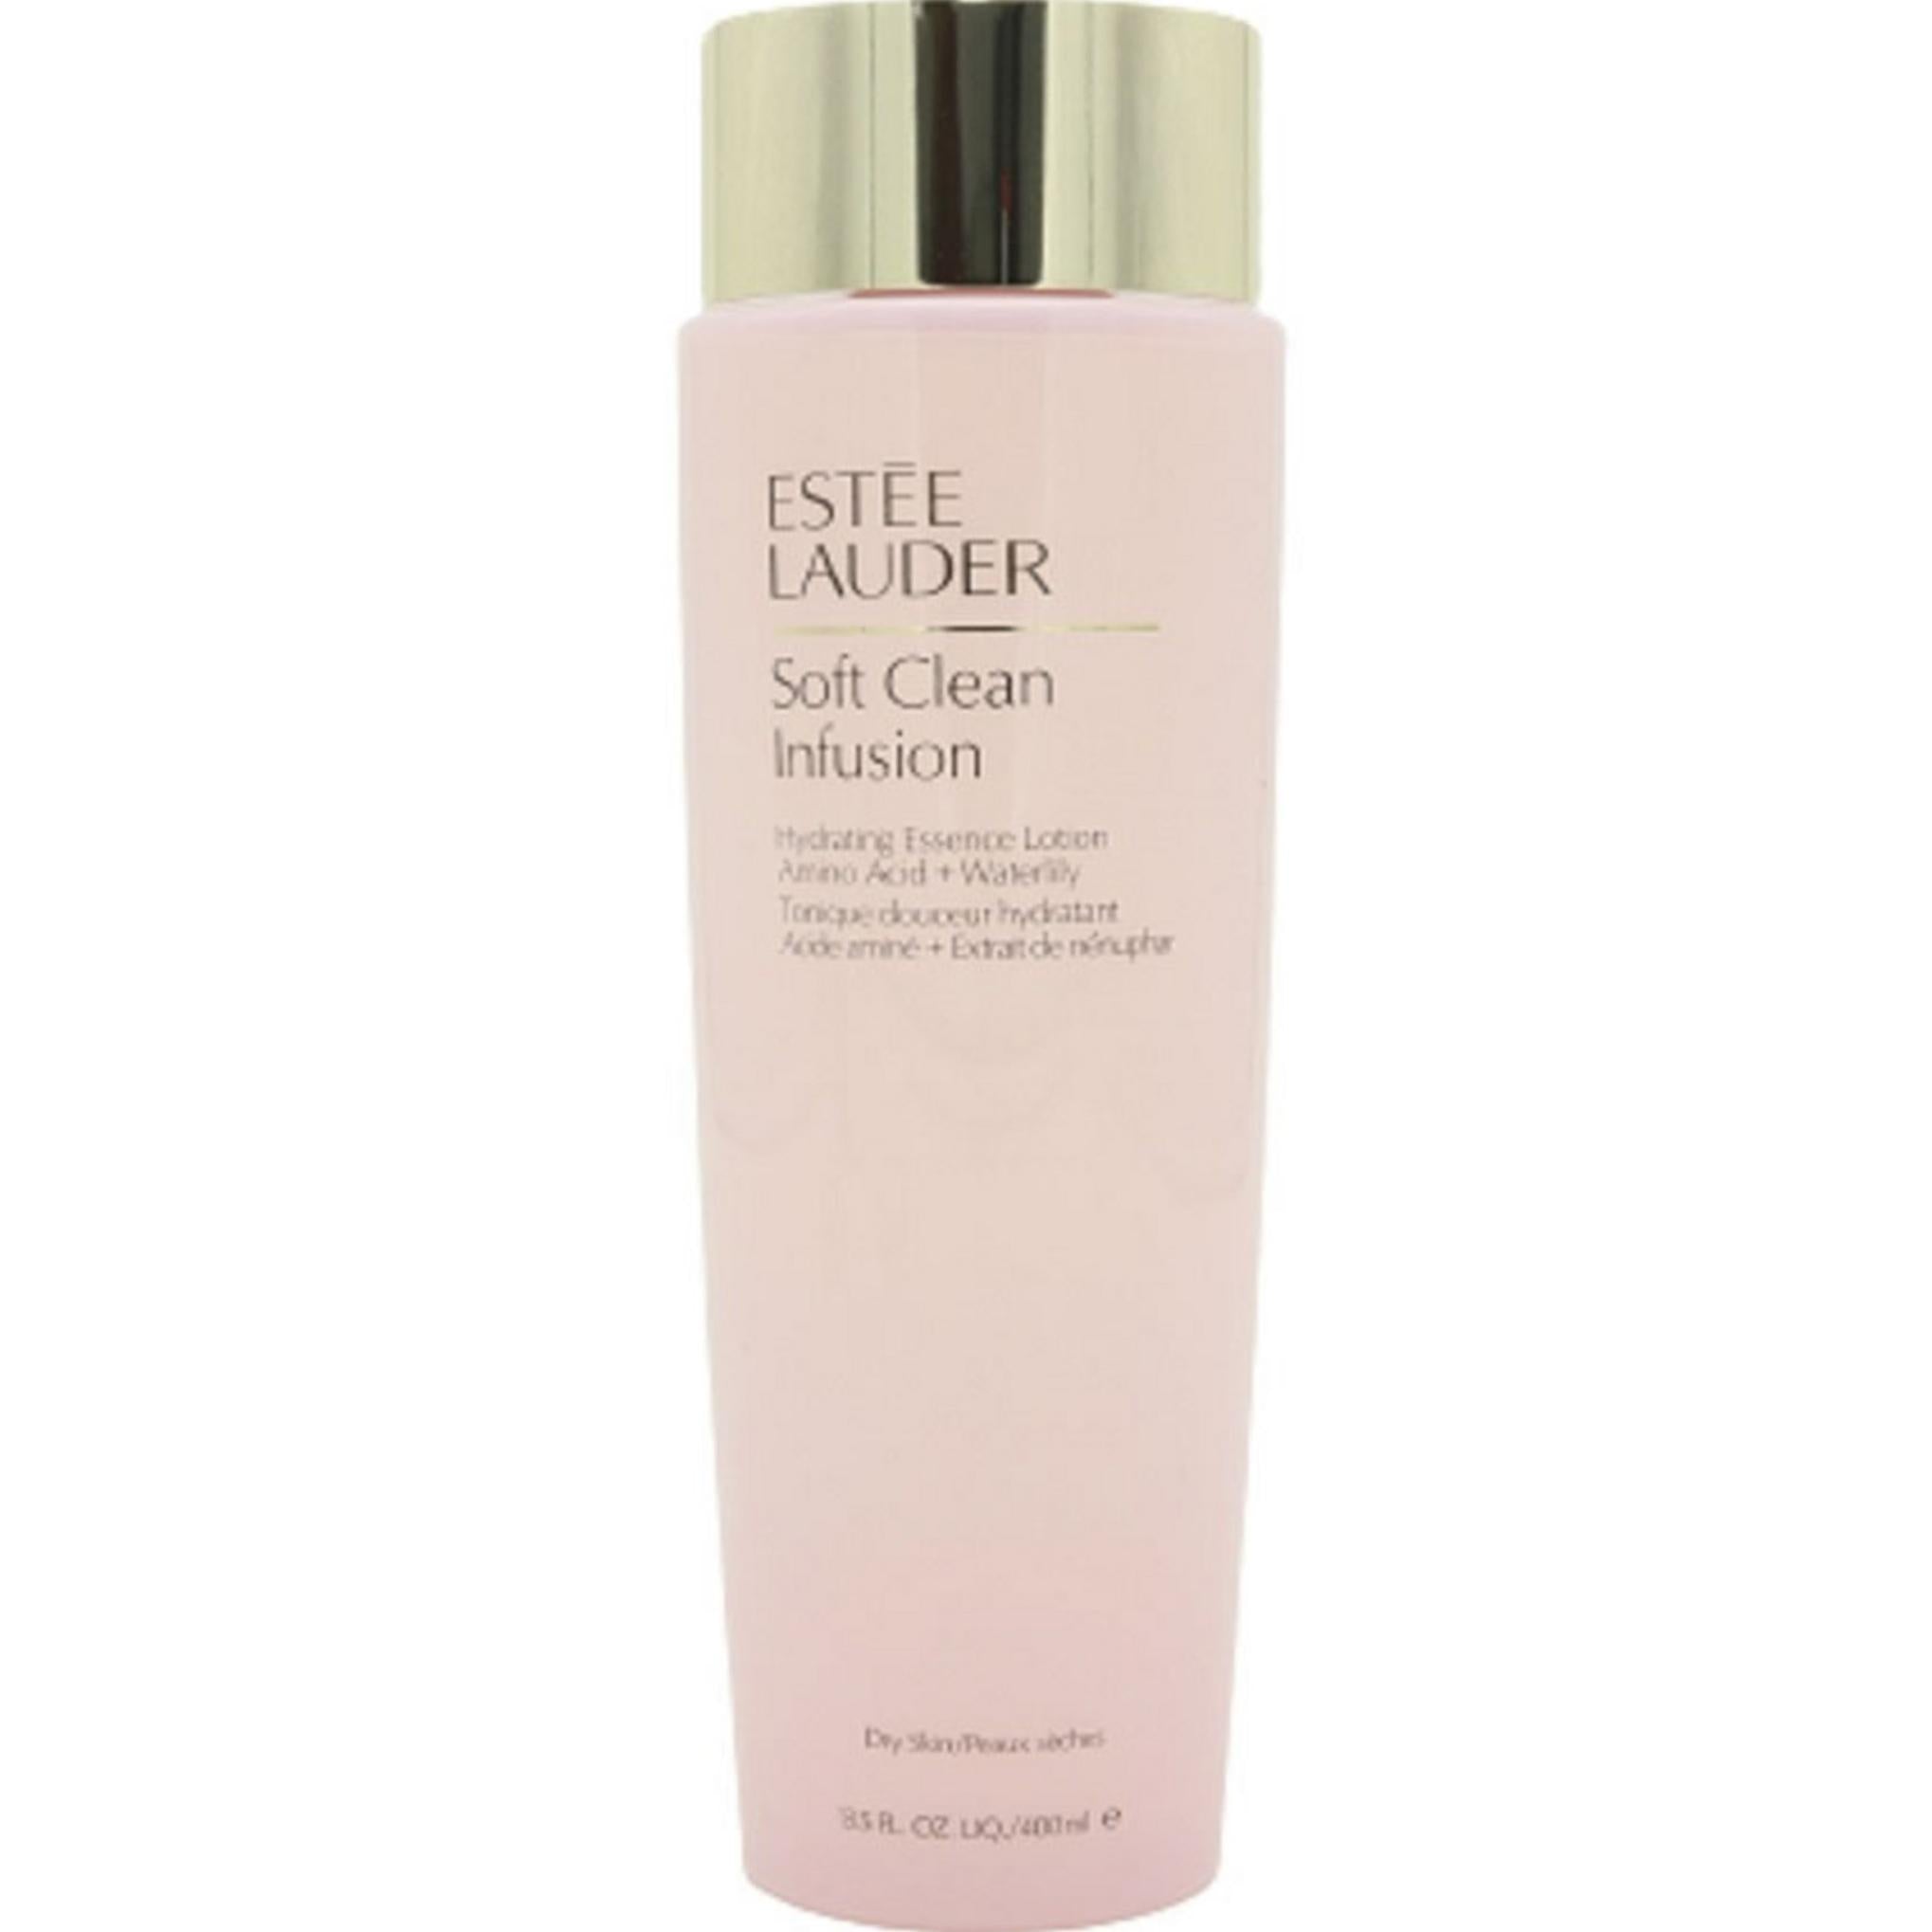 Estee Lauder Soft Clean Infusion Hydrating Essence Lotion